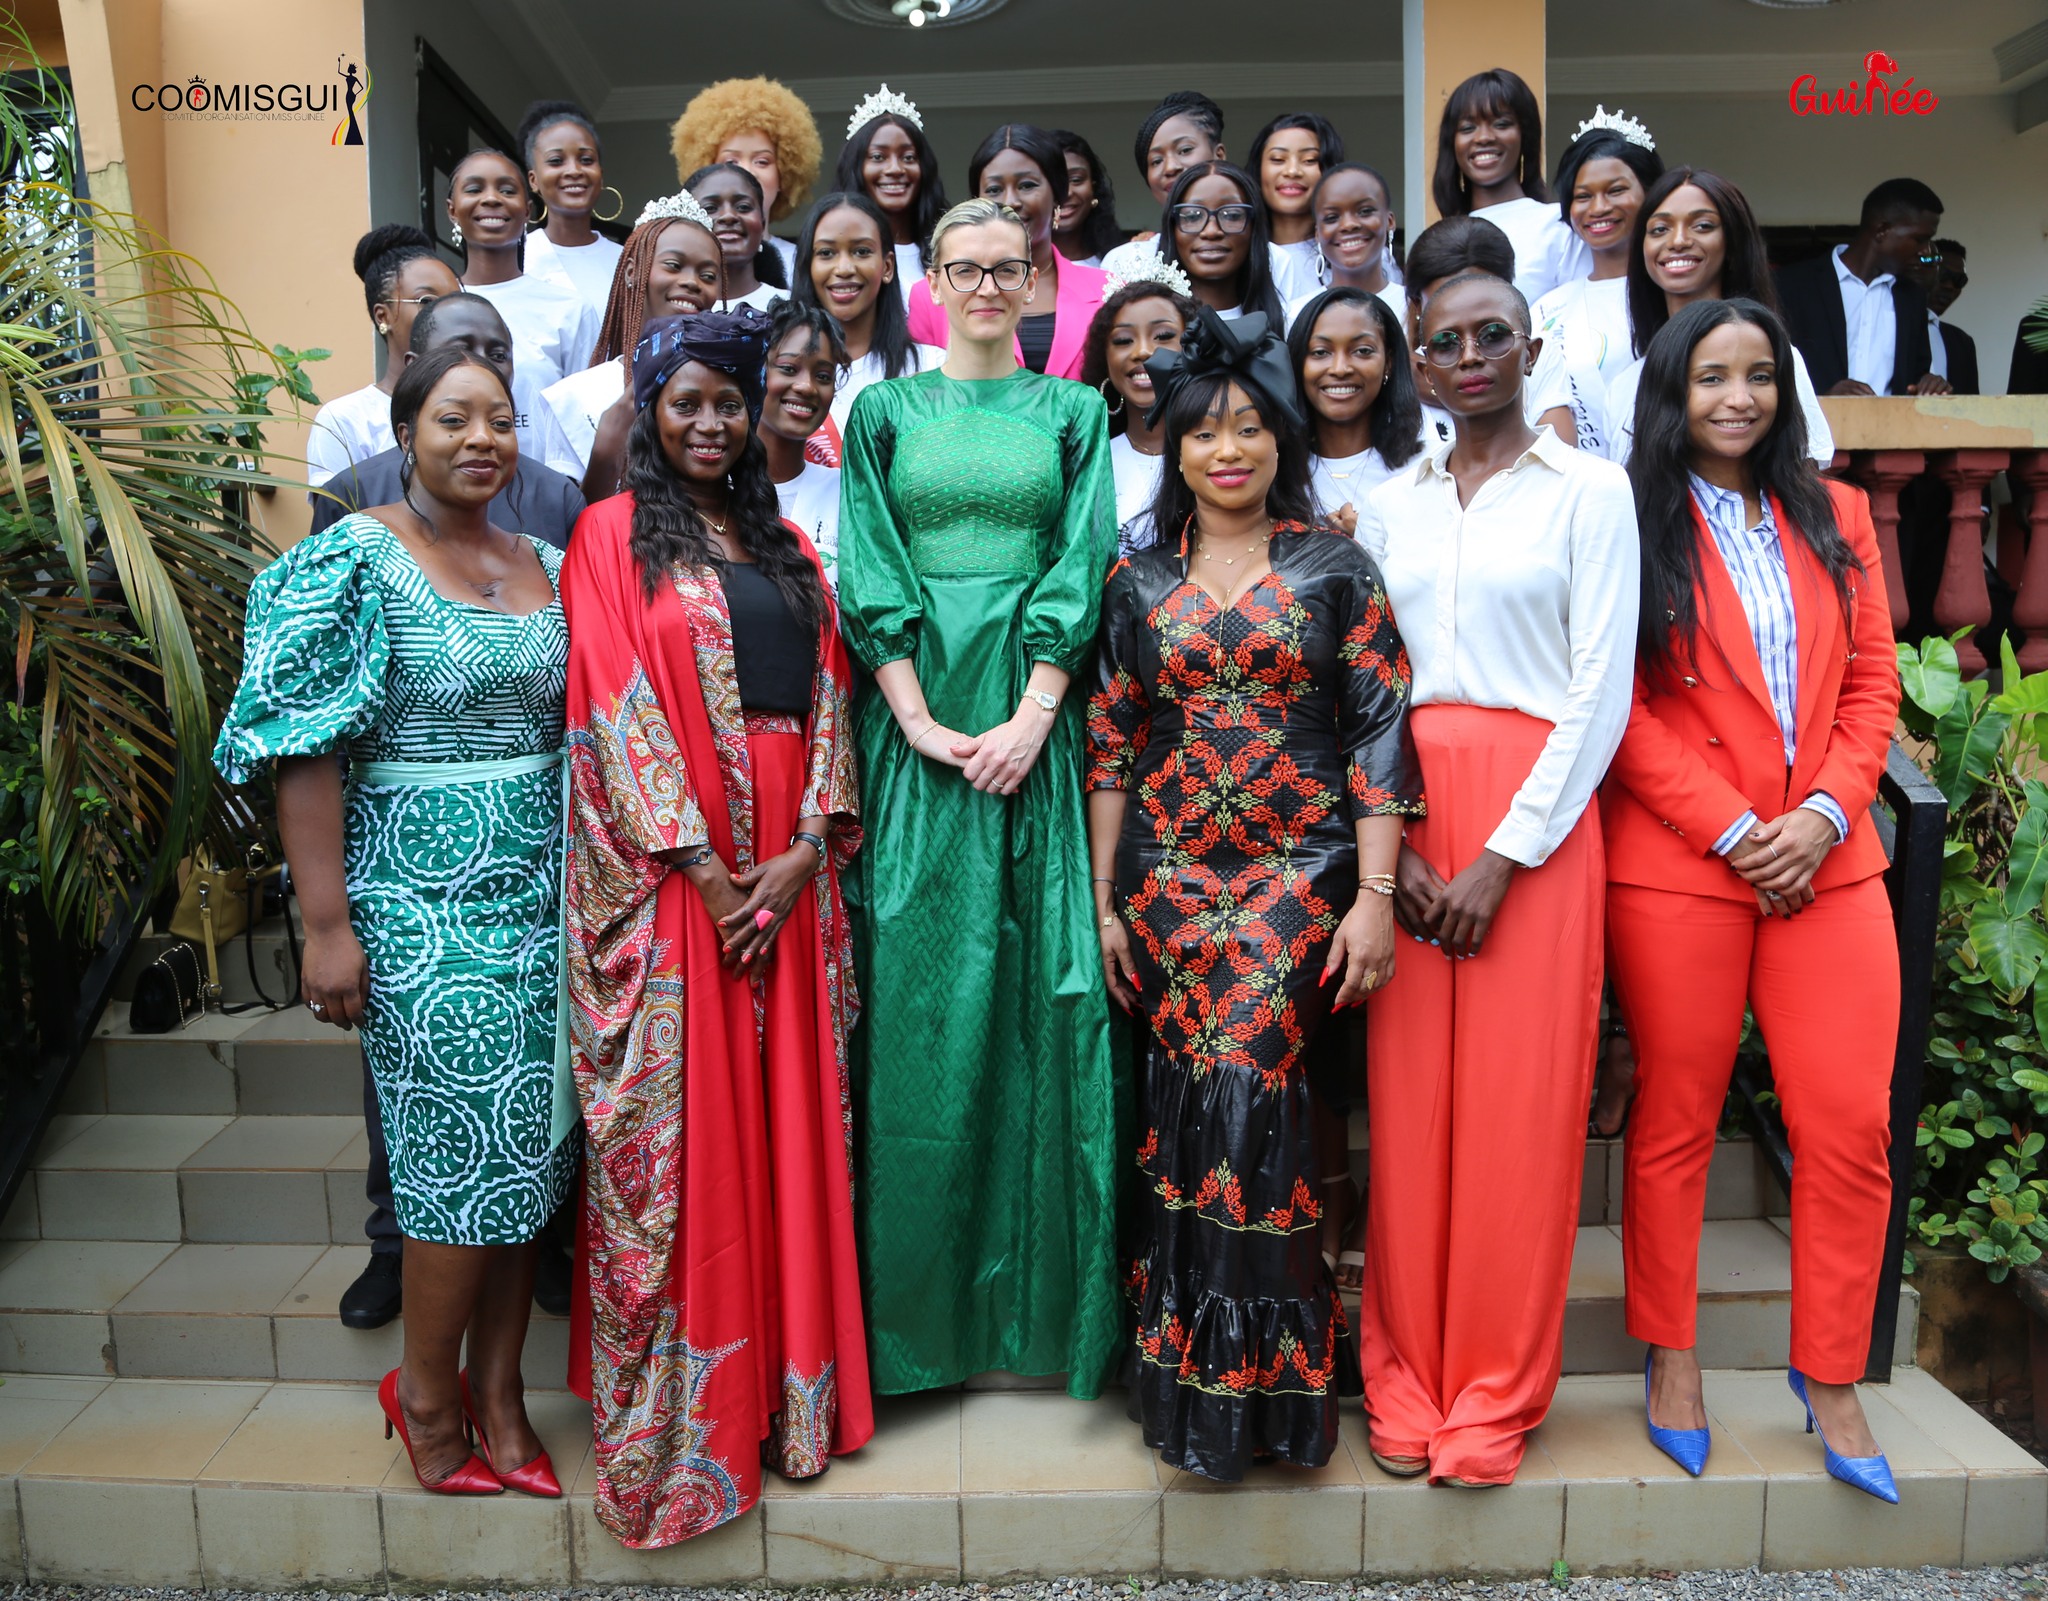 VISIT OF-THE-FIRST-LADY-MRS-DAURIANE-DOUMBOUYA-MISS-GUINEE 2023-IN-CENTER-KAPAAF-OFFICIAL PICTURE